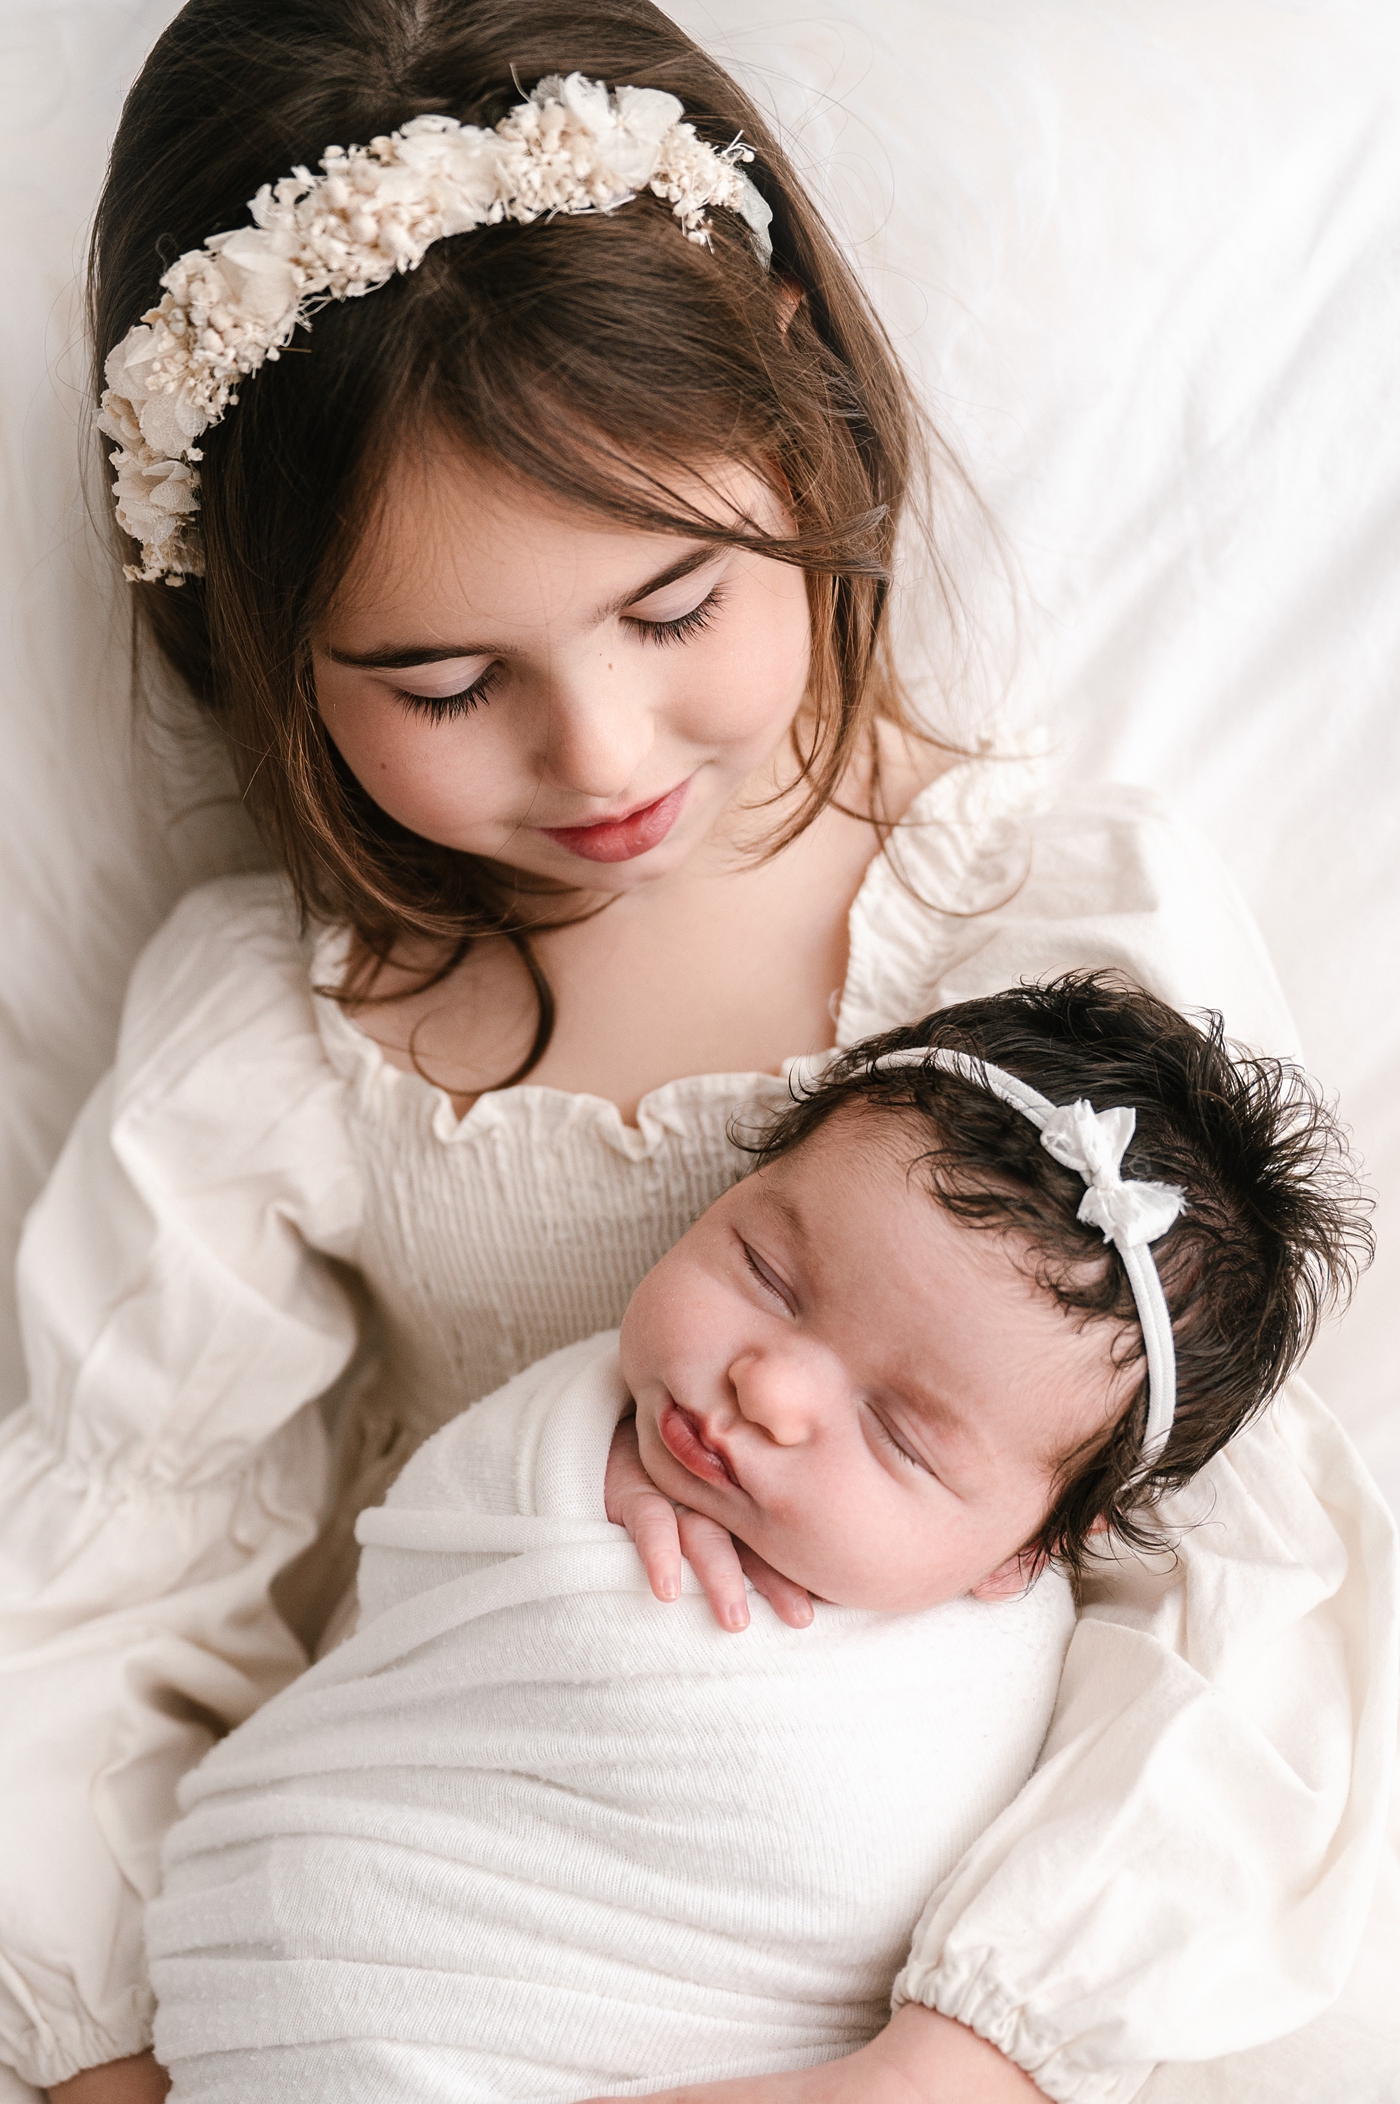 Baby sister sleeps in big sisters arms during studio newborn session. Image by Meg Newton Photography.